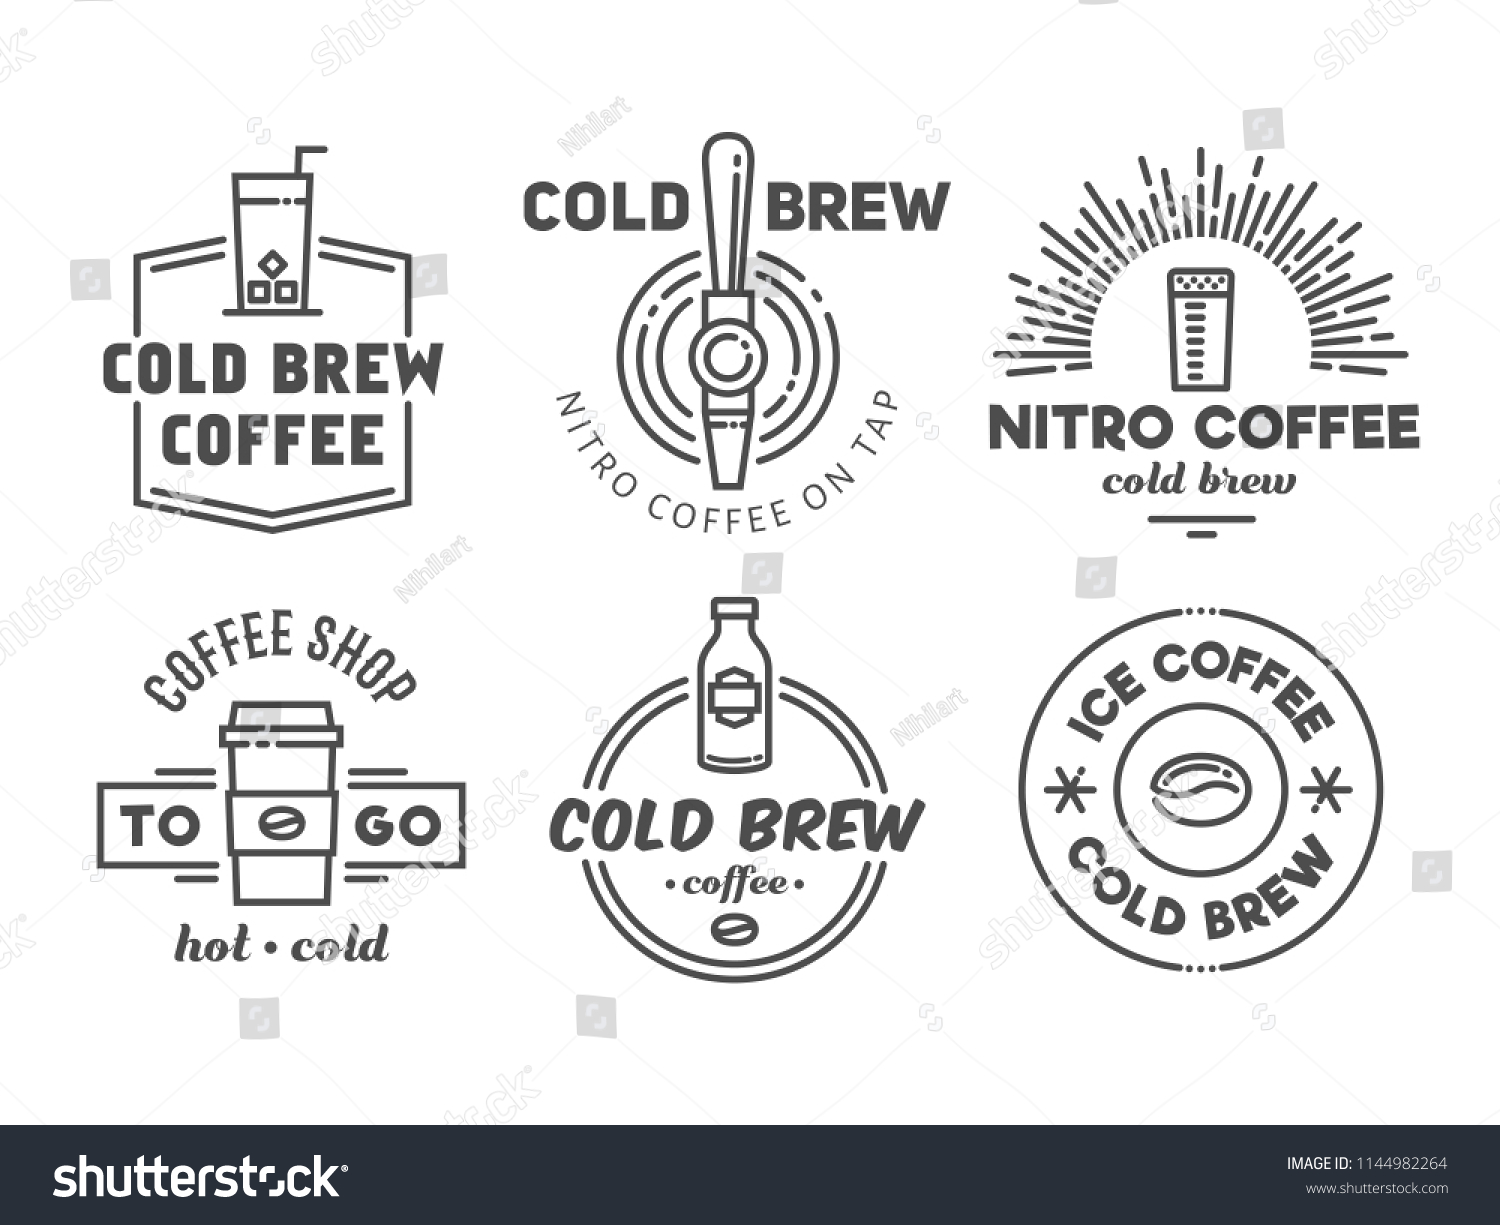 SVG of Cold brew coffee and nitro coffee badges. Vector line art logos for cafe of coffee shop. svg